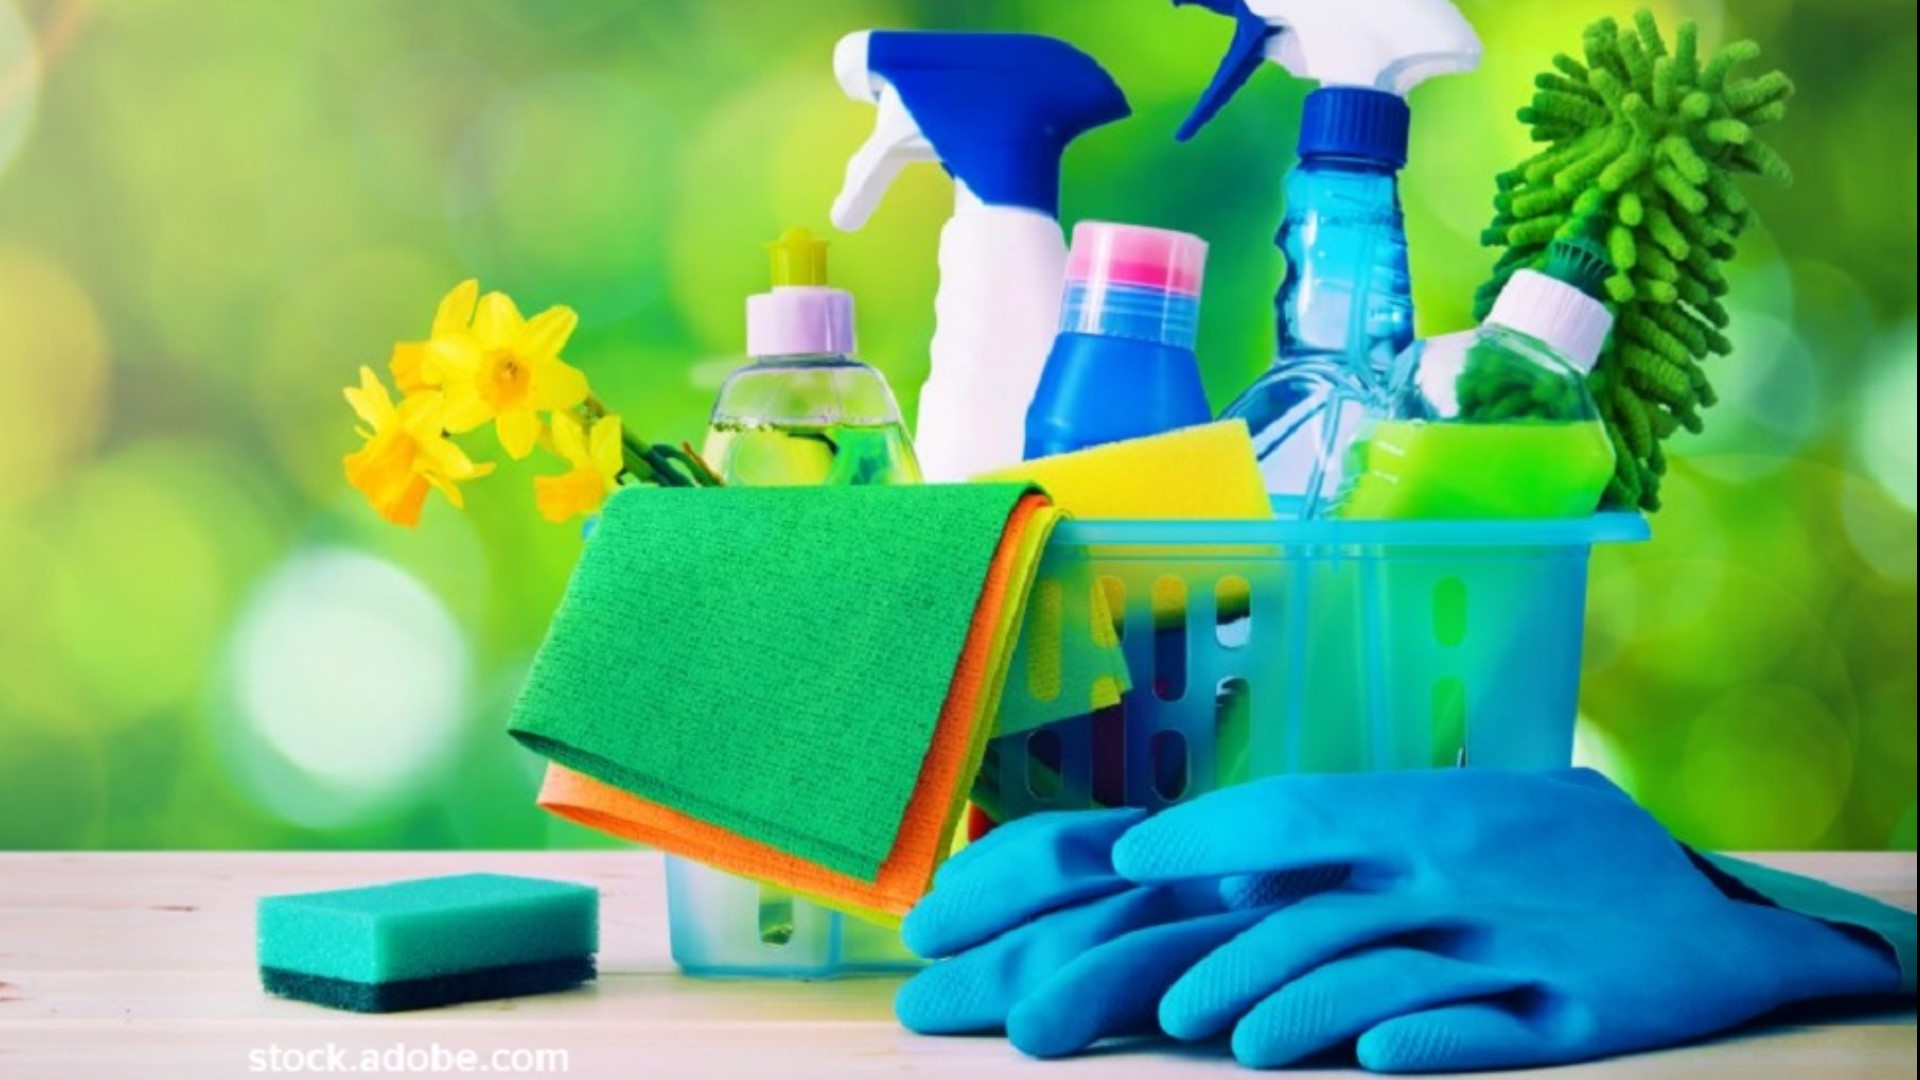 The cleaning product industry makes billions annually. But keeping things clean doesn't mean you have to overspend.